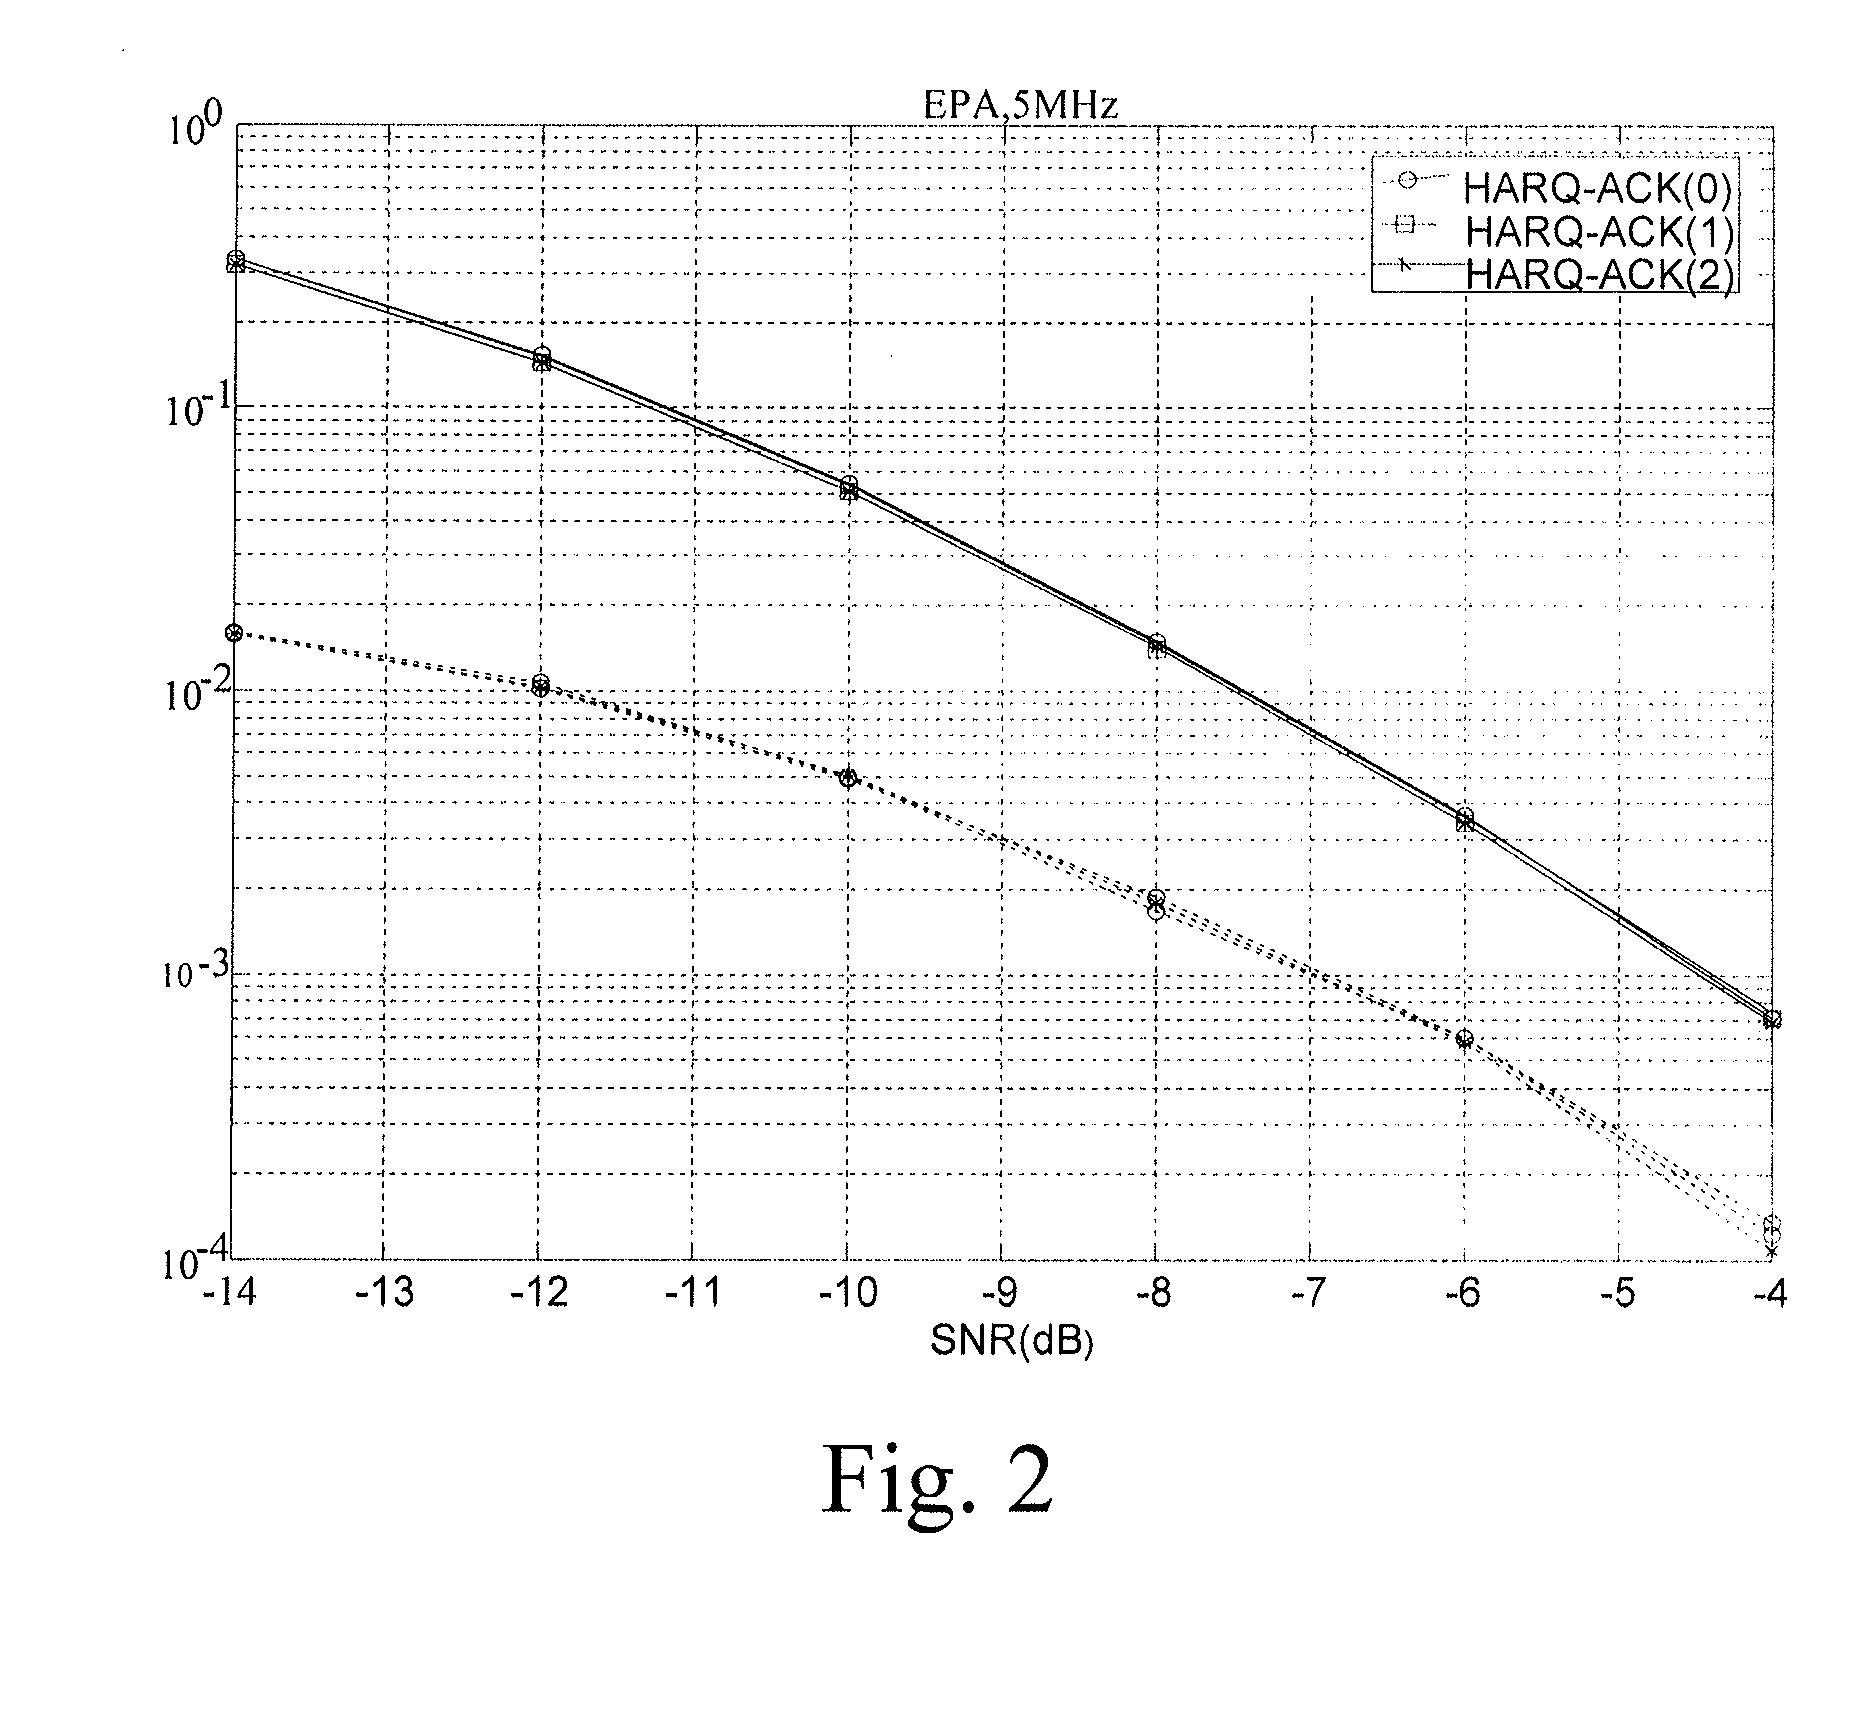 Feedback information relating to a mobile communications system using carrier aggreregation